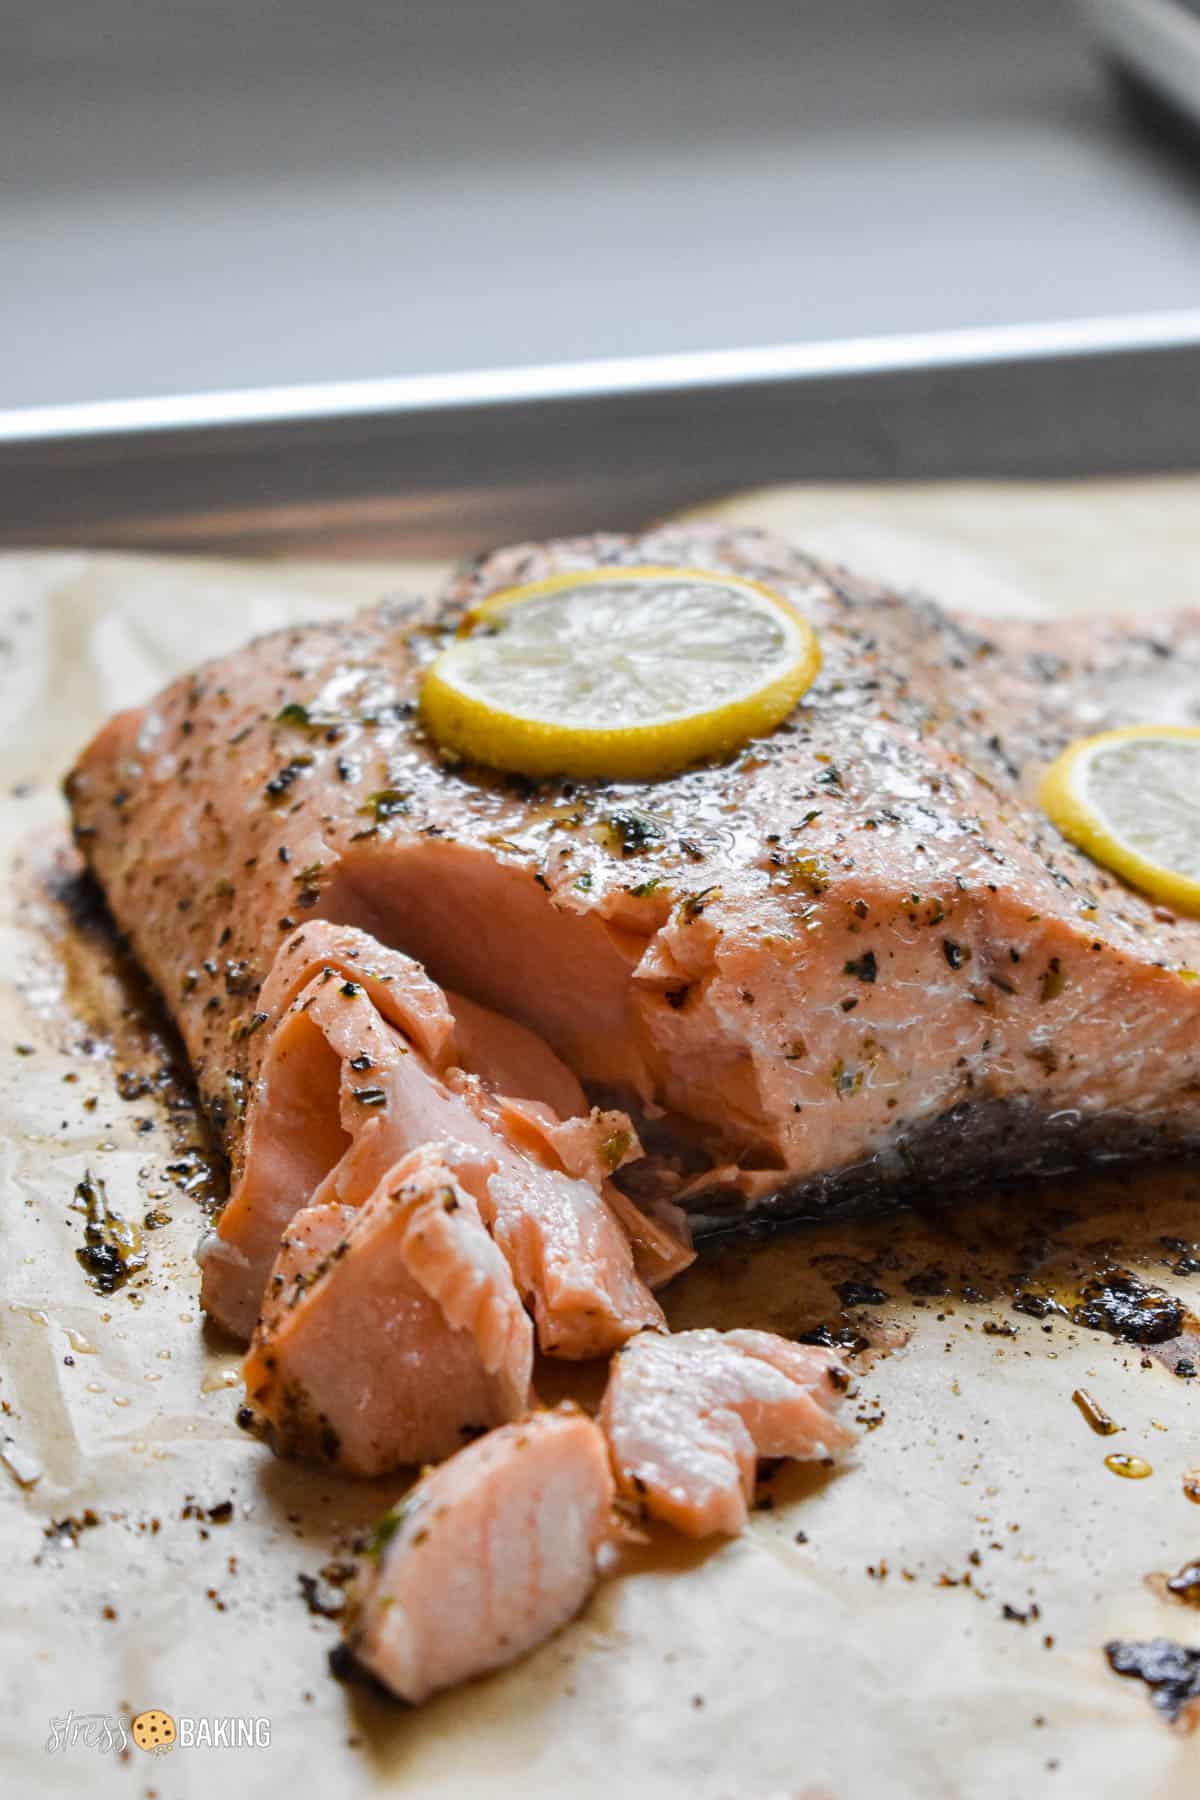 Baked salmon coated in spices and thin lemon slices flaking apart on parchment paper